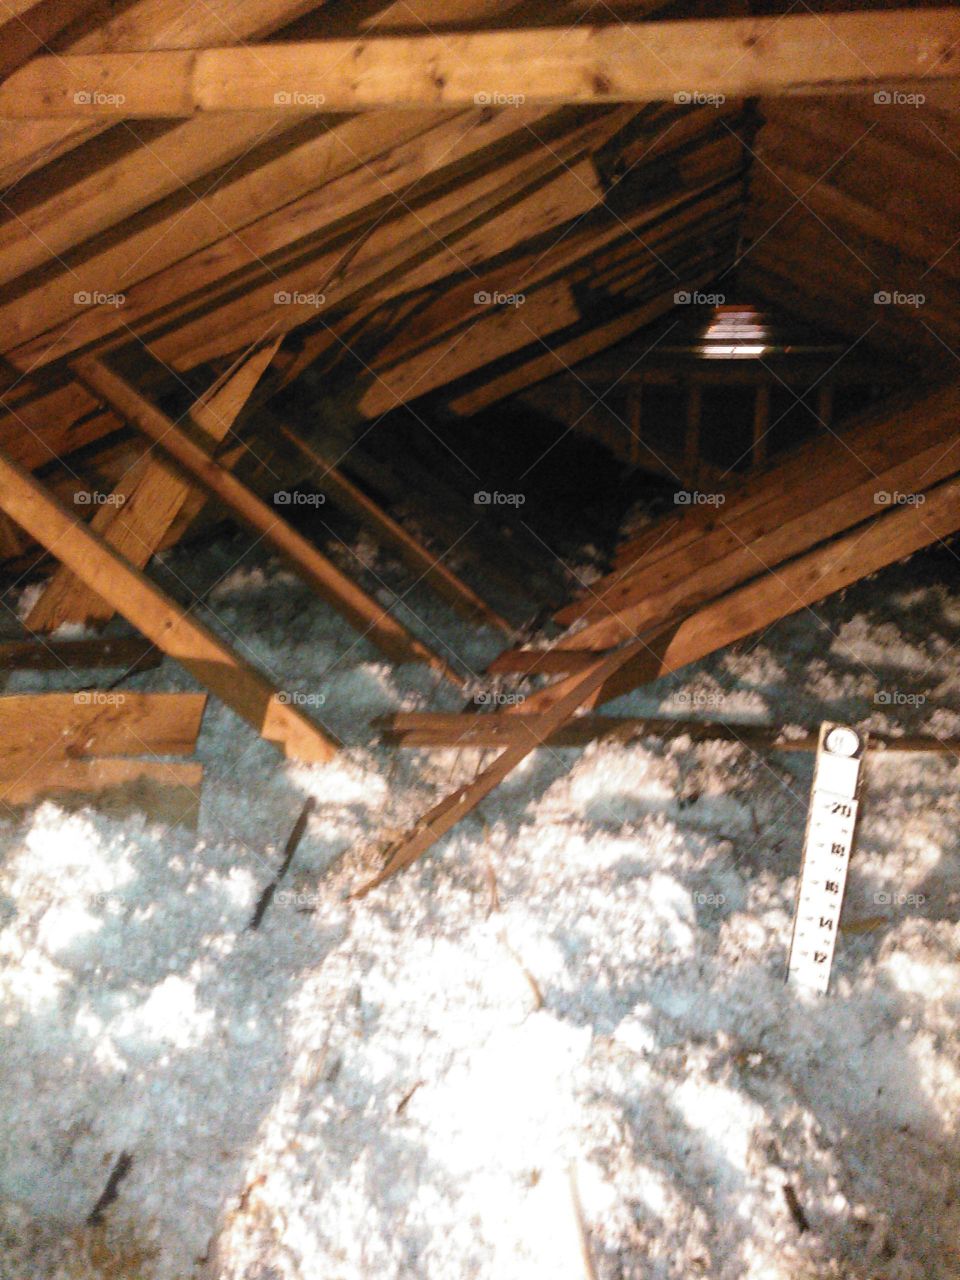 "Sea of Insulation."
Here is an image of an attic full of nothing but insulation, in a house that is very, very unsafe to live in due to structural faults